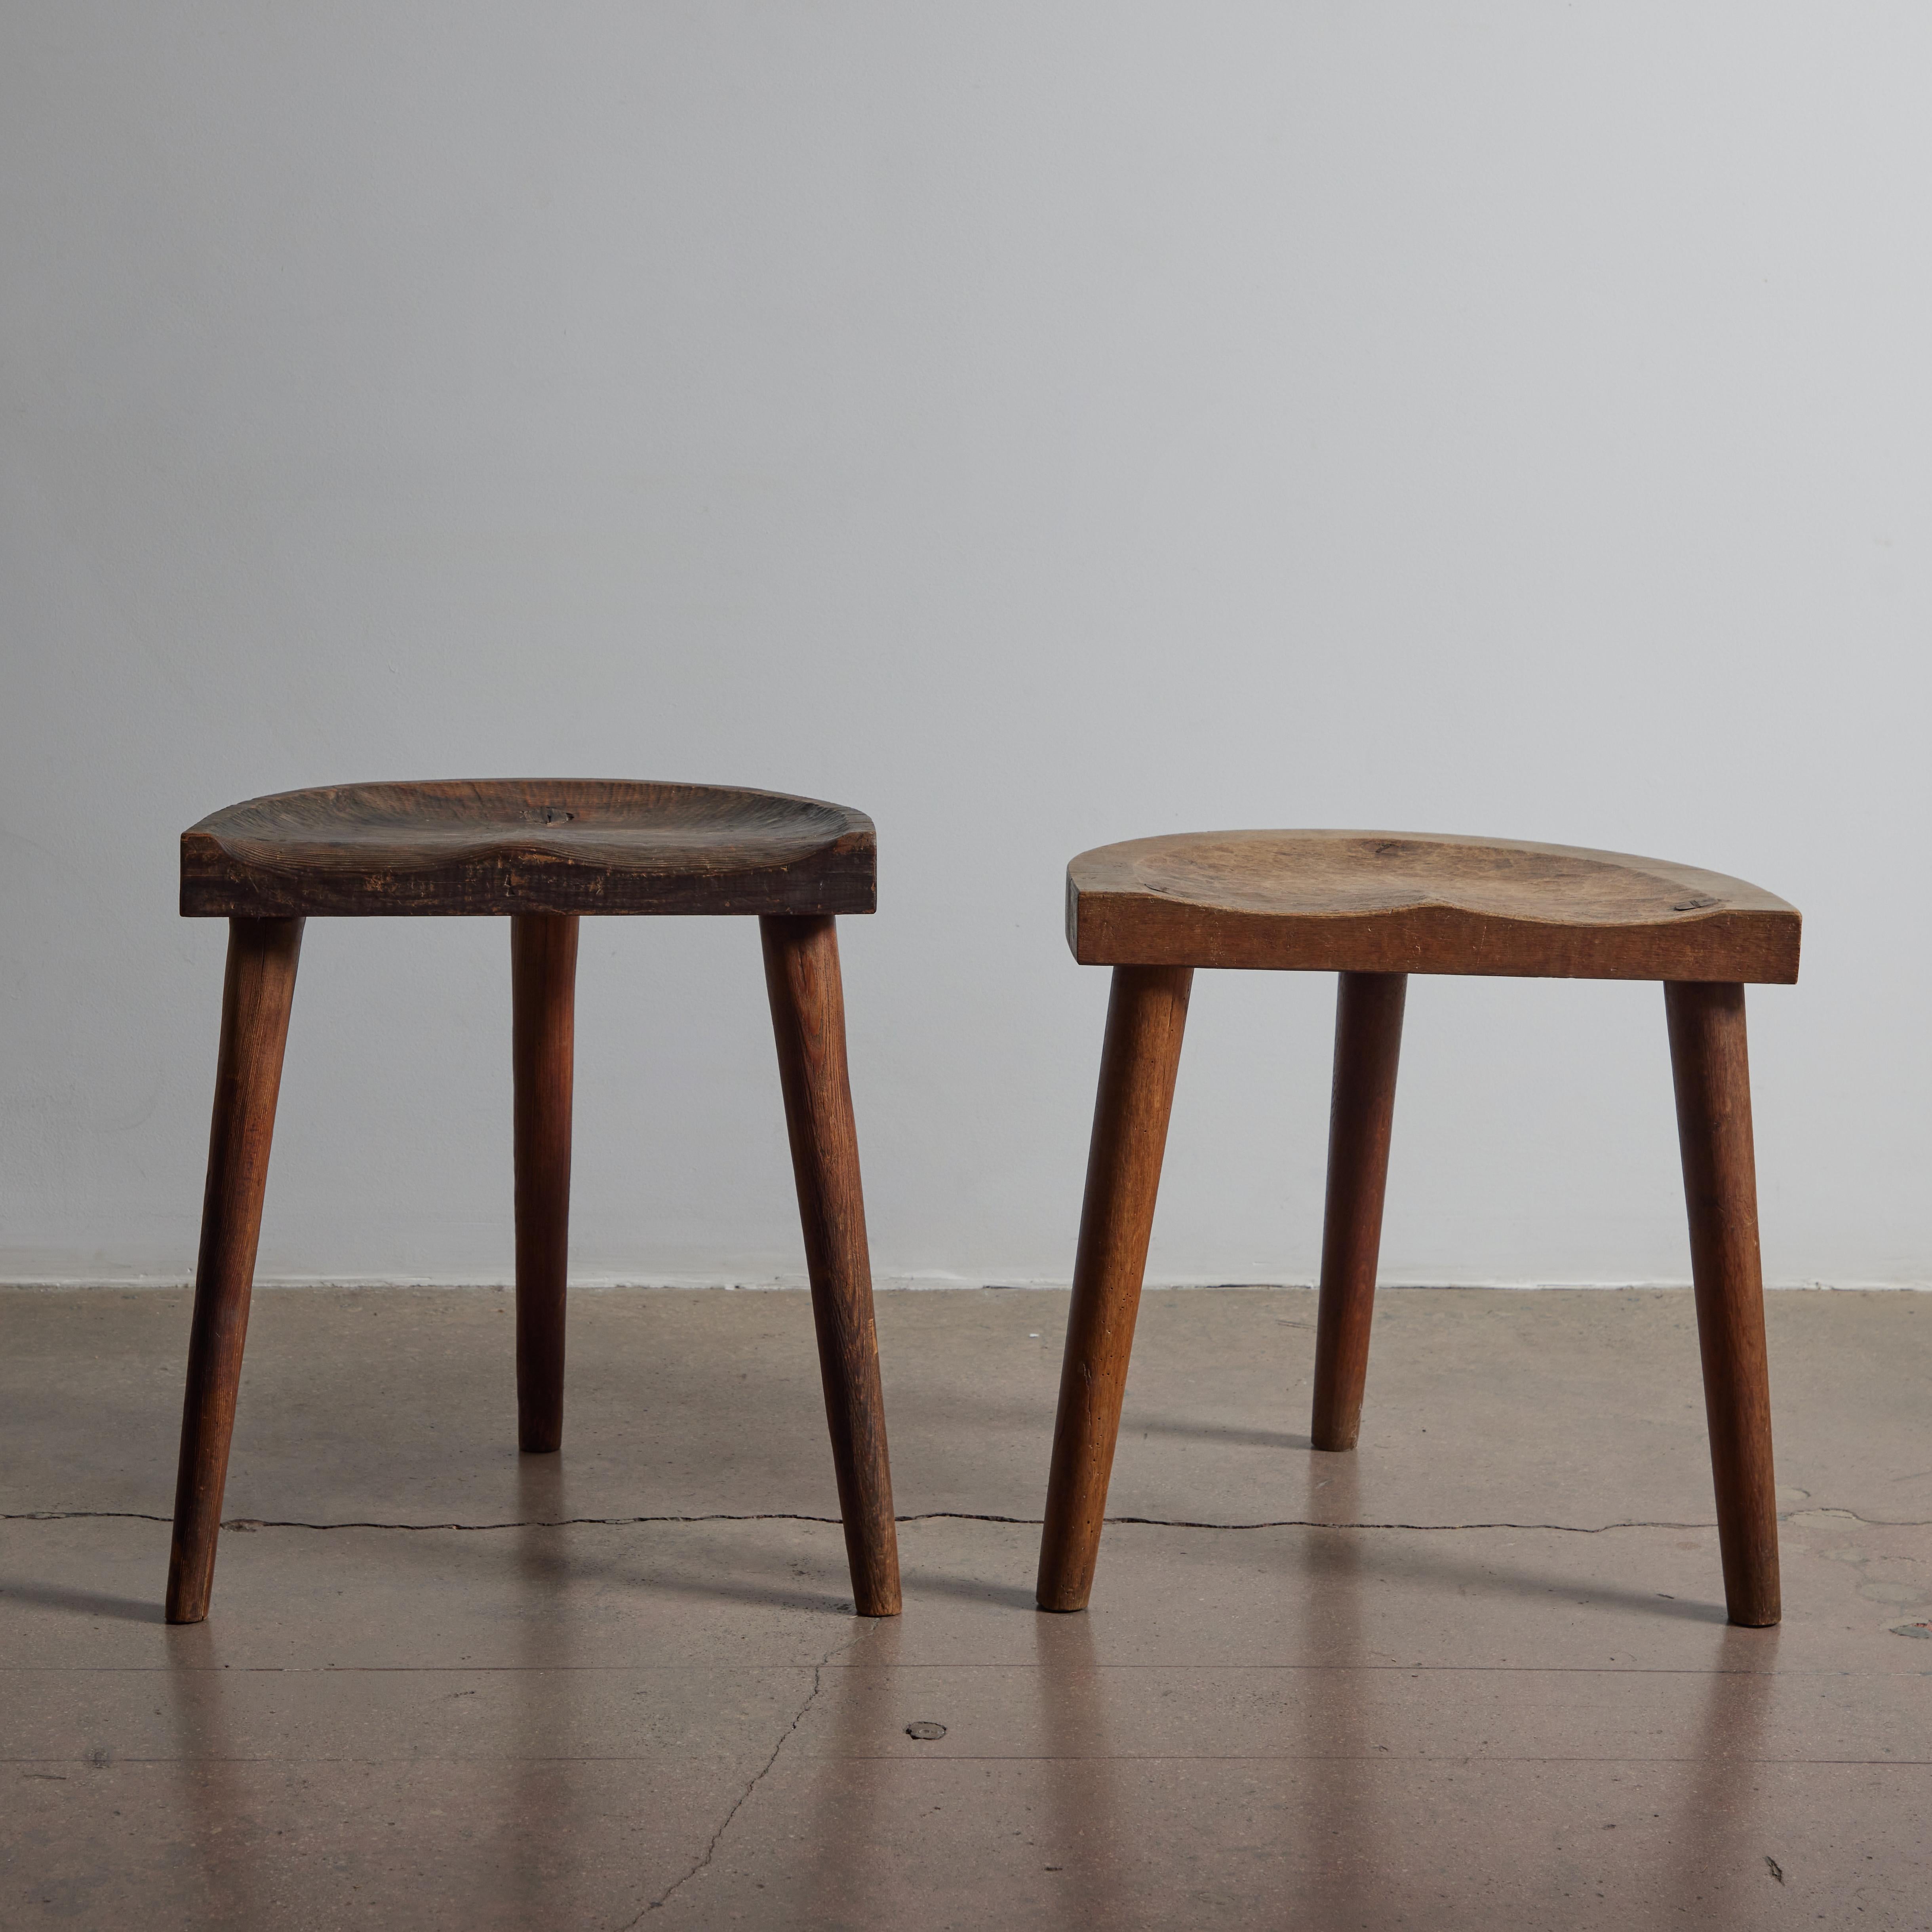 Hand gouged oak stools by Jean Touret for Ateliers Marolles. Made in France circa 1960s. Priced per item.

Jean Touret moved to Pezay, a rural area near Marolles, in 1946. While there, he became highly conscious of the uncertainty that Industrial